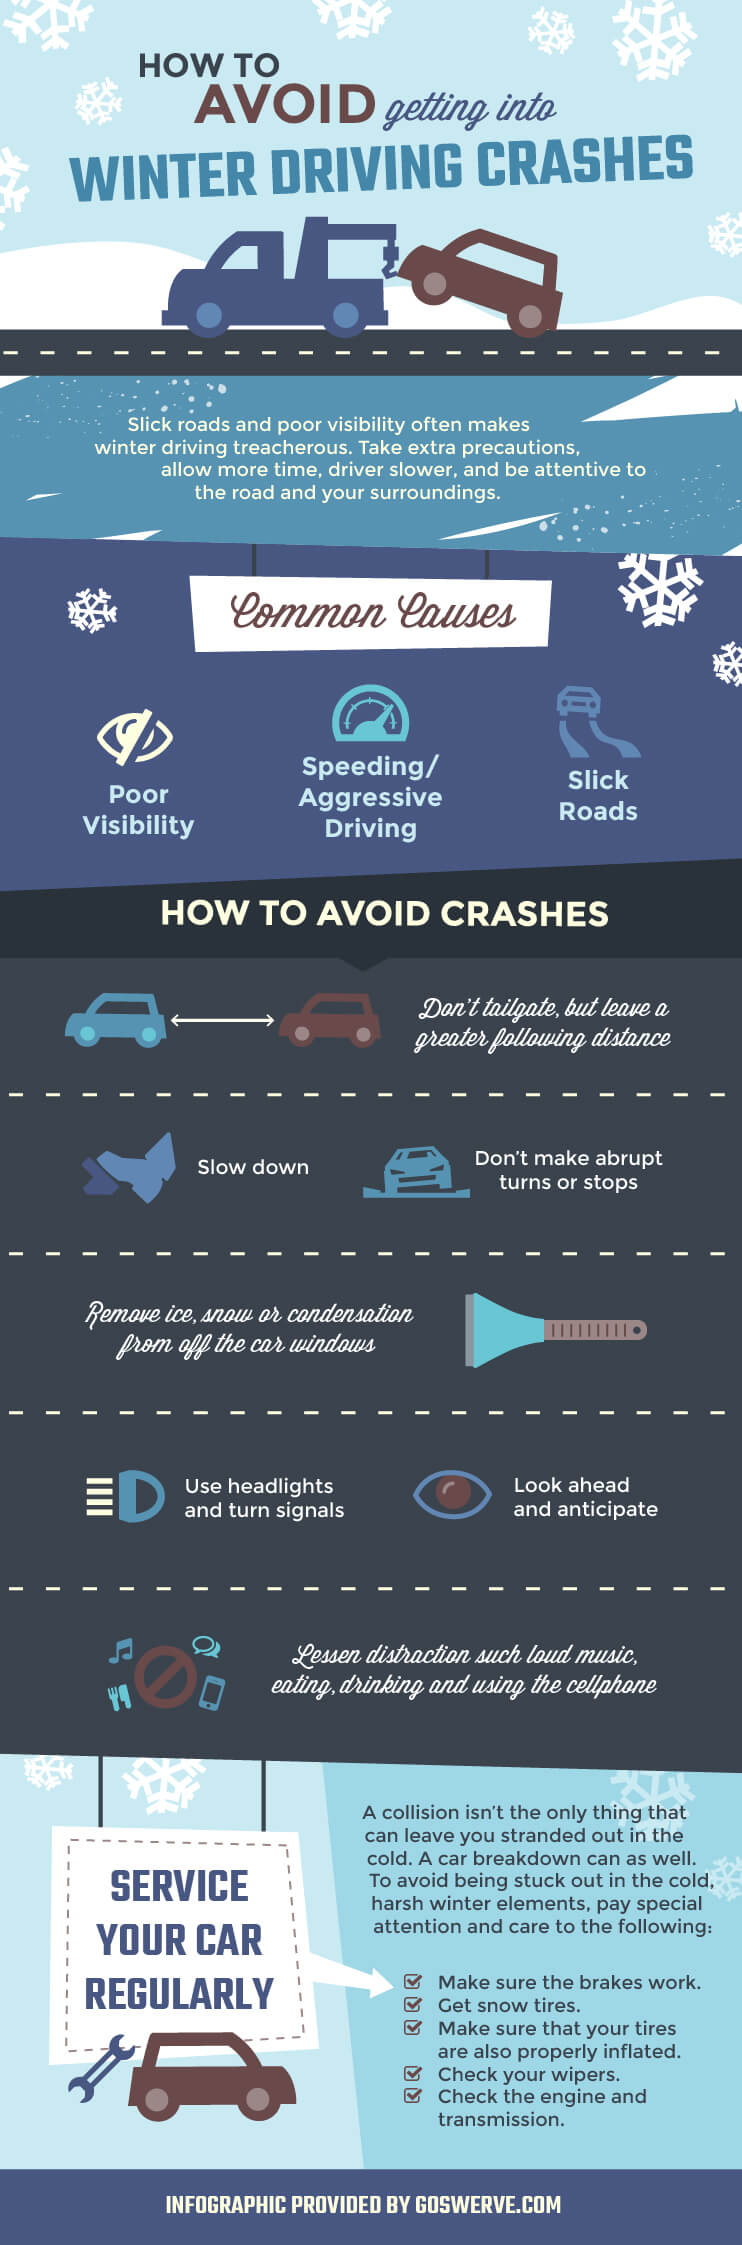 go-swerve-how-to-avoid-getting-into-winter-driving-crashes-infographic-20161215